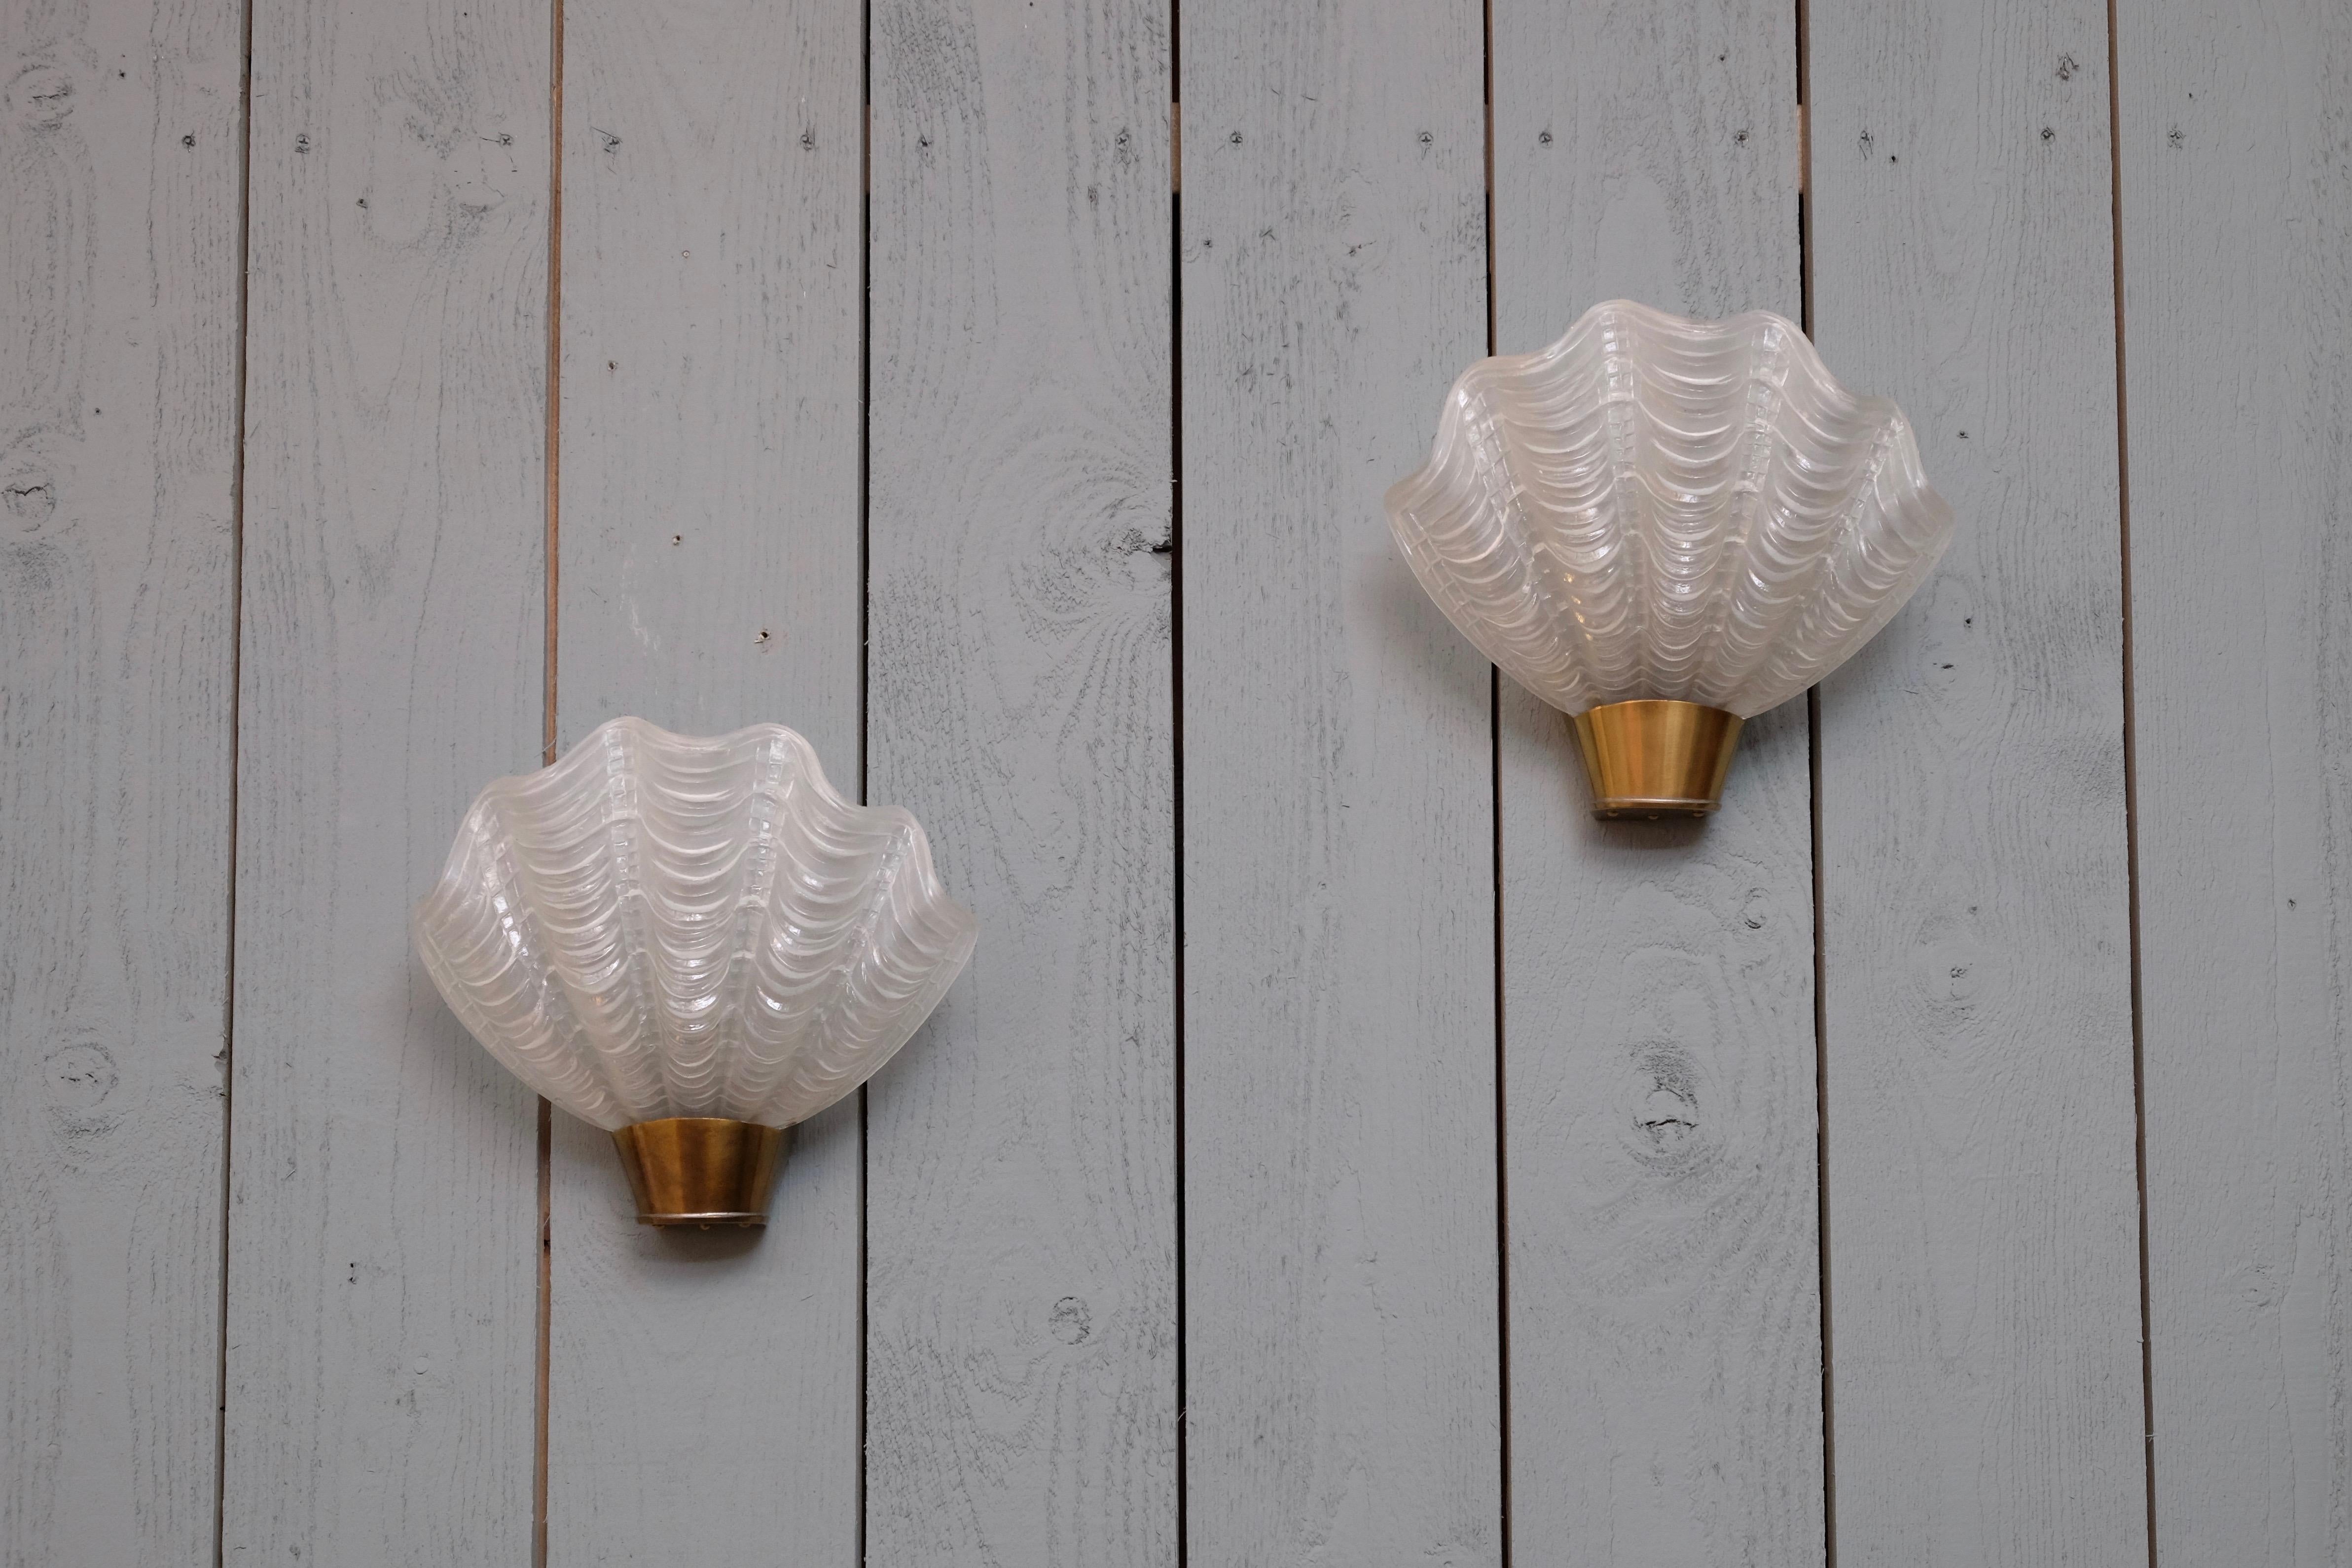 Please note: listed price is for one (1) wall lamp. Set of 6 available.

Brass and glass. Produced by ASEA, Sweden, 1950s.
Good condition, with signs of usage. New wiring available on request, with or without cord.

